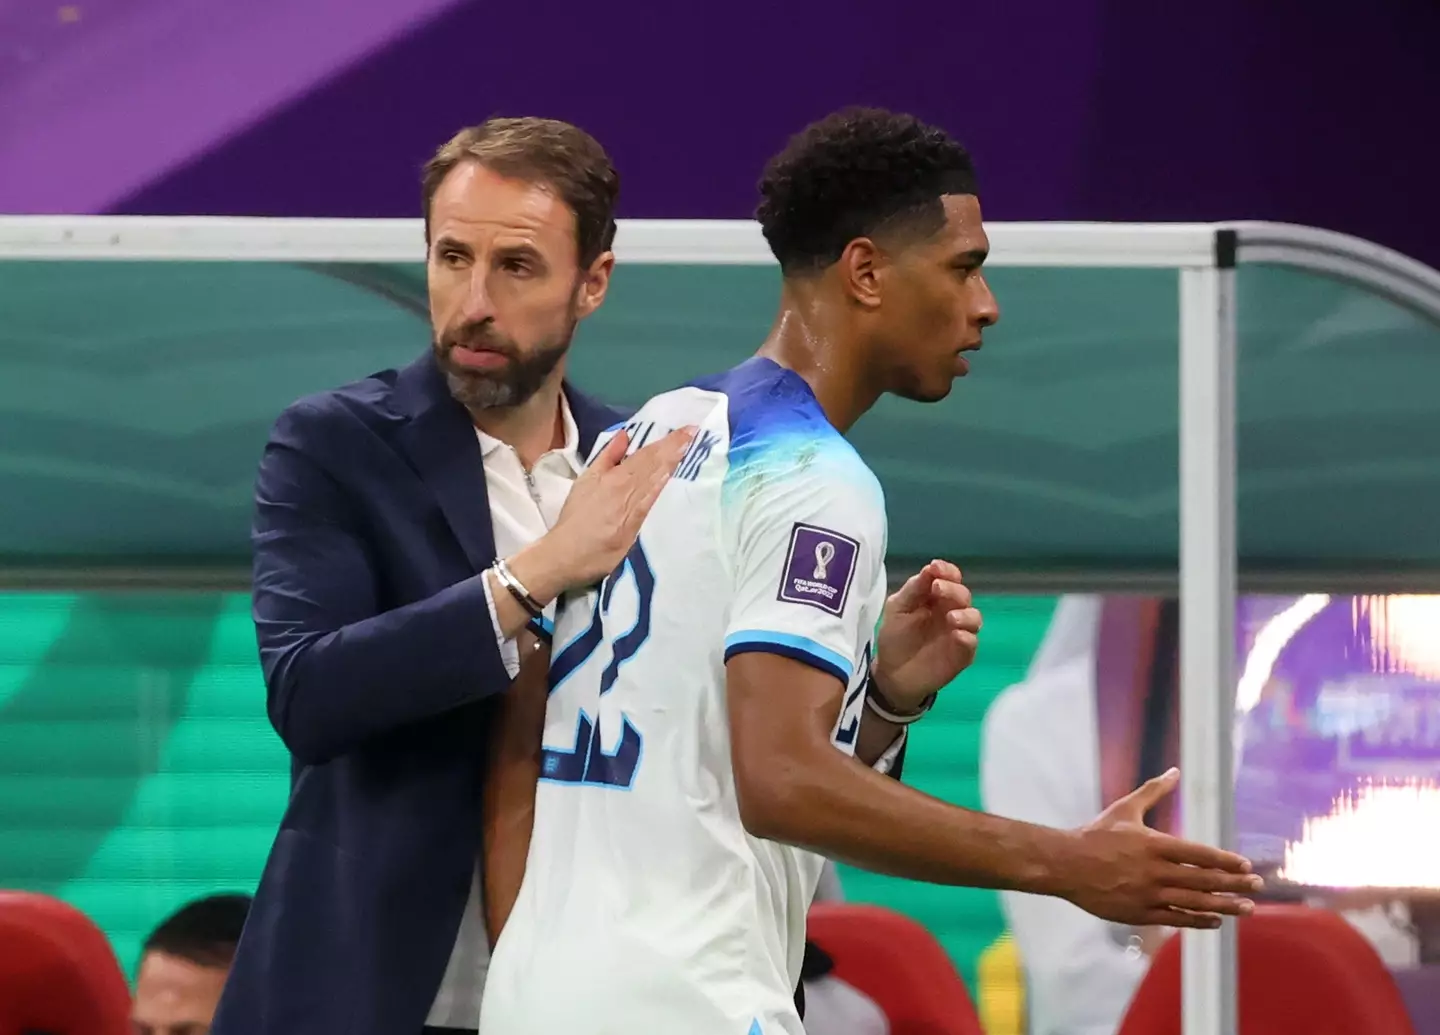 Gareth Southgate’s England side will face 2018 World Cup champions France in the quarter-finals in Qatar.